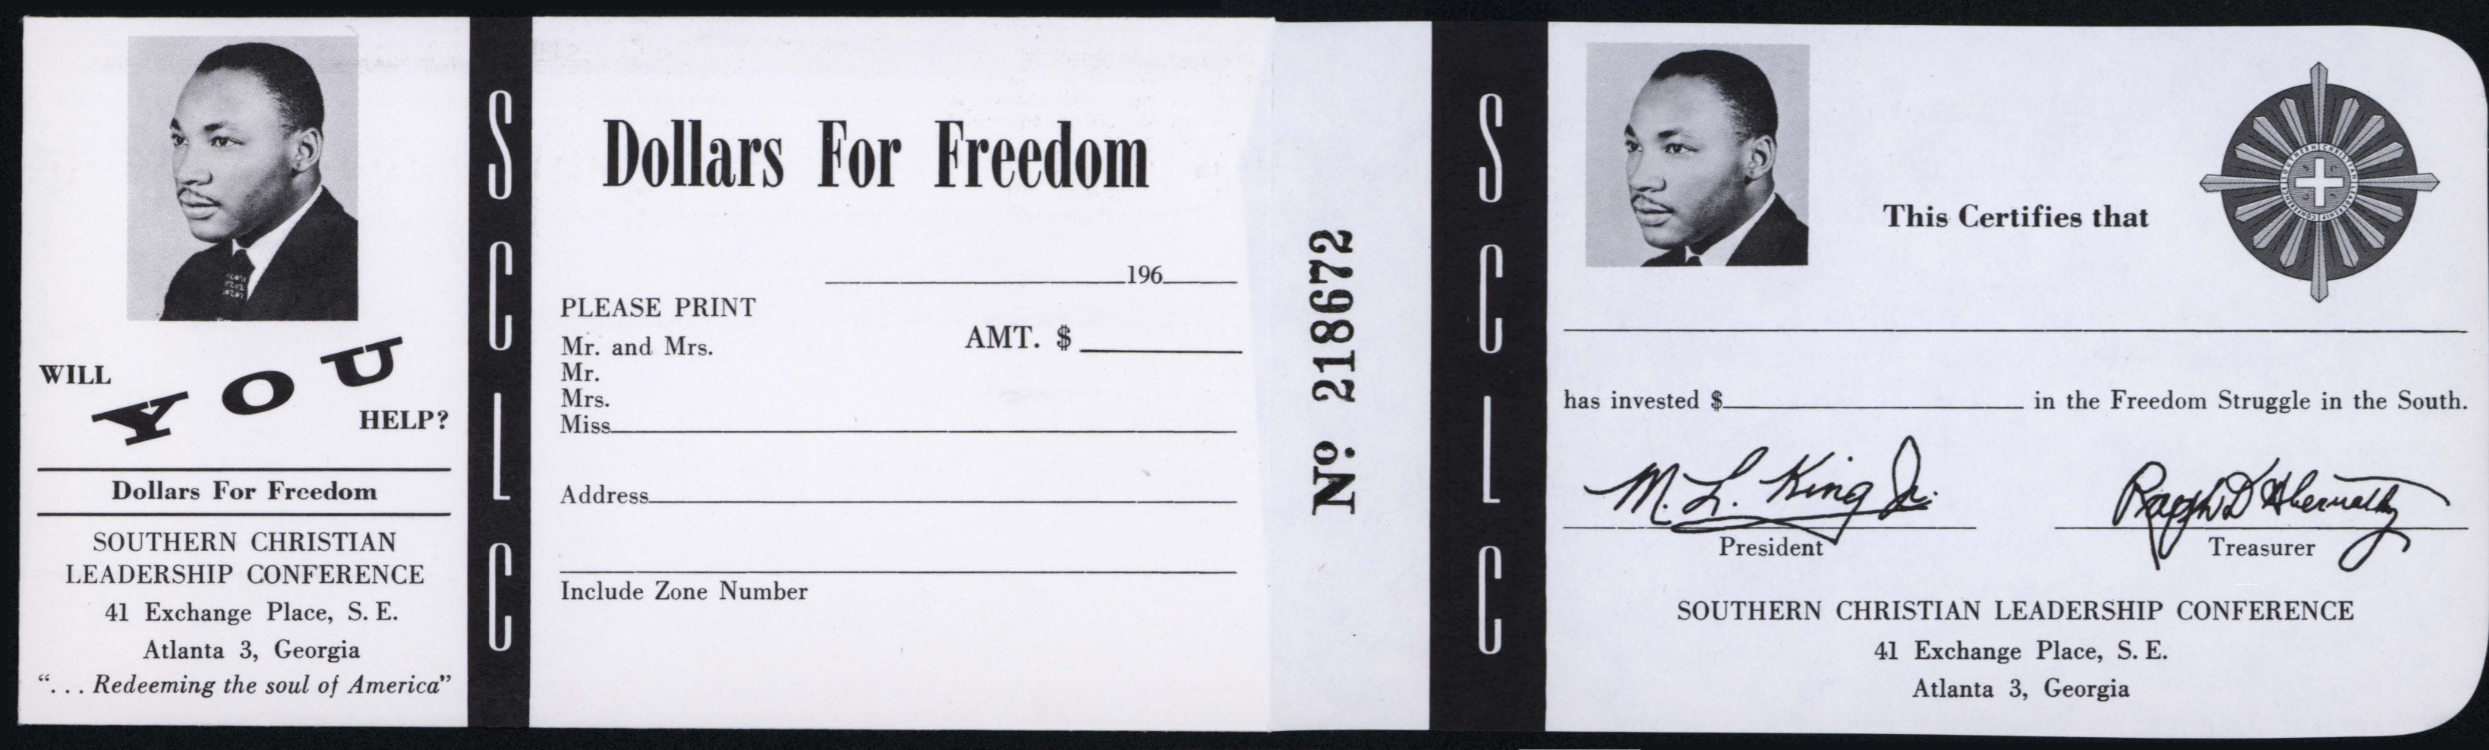 Southern Christian Leadership Conference, “Dollars for Freedom” donation slip, Atlanta Georgia, October 26-27, 1962, Langston Hughes ephemera collection, Special Collections, University of Delaware Library. Produced in Atlanta, these slips were also used in Washington D.C. and Brooklyn, New York.